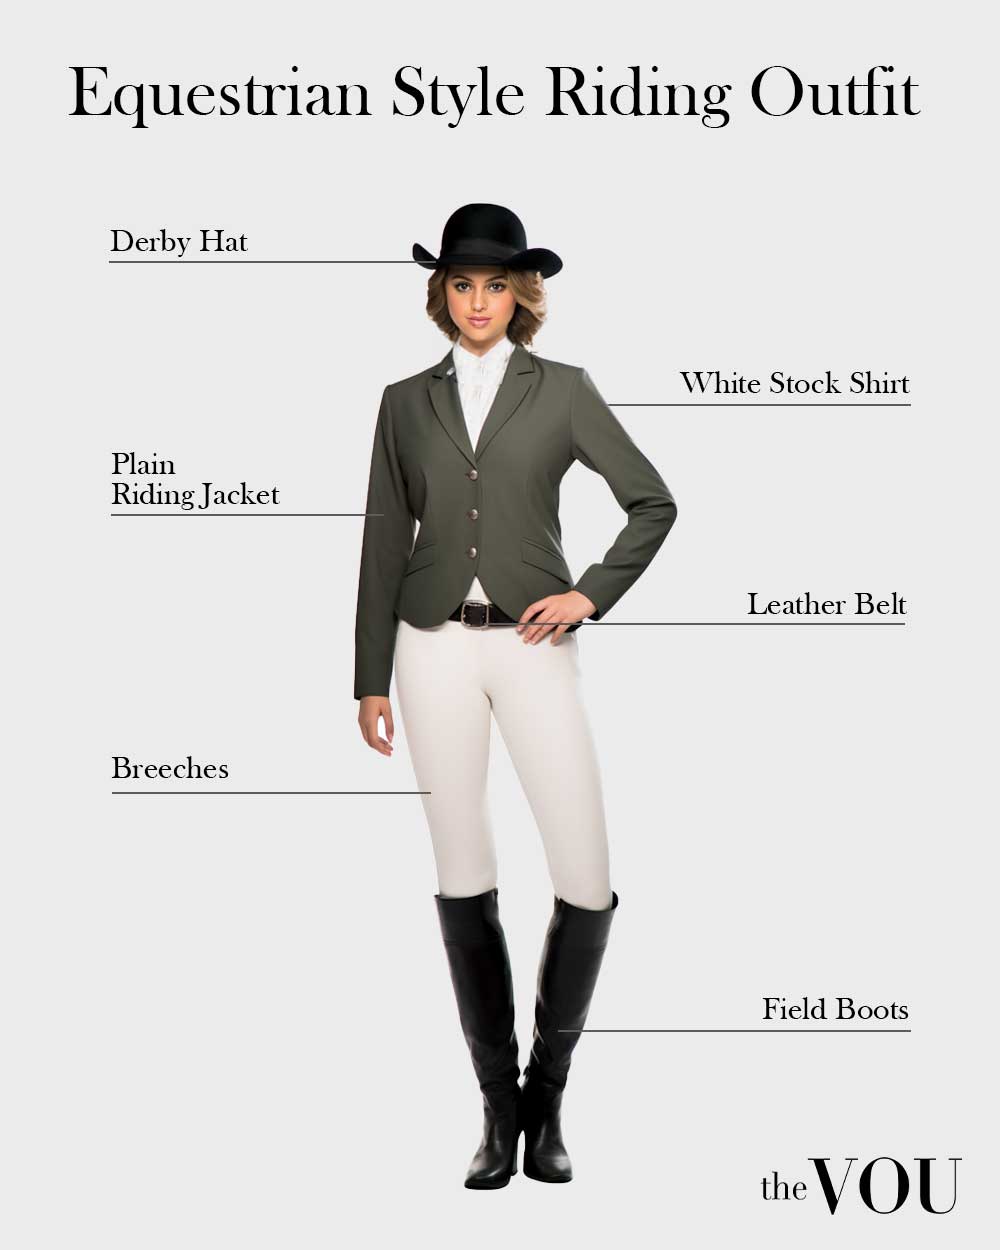 Equestrian Style Riding Outfit